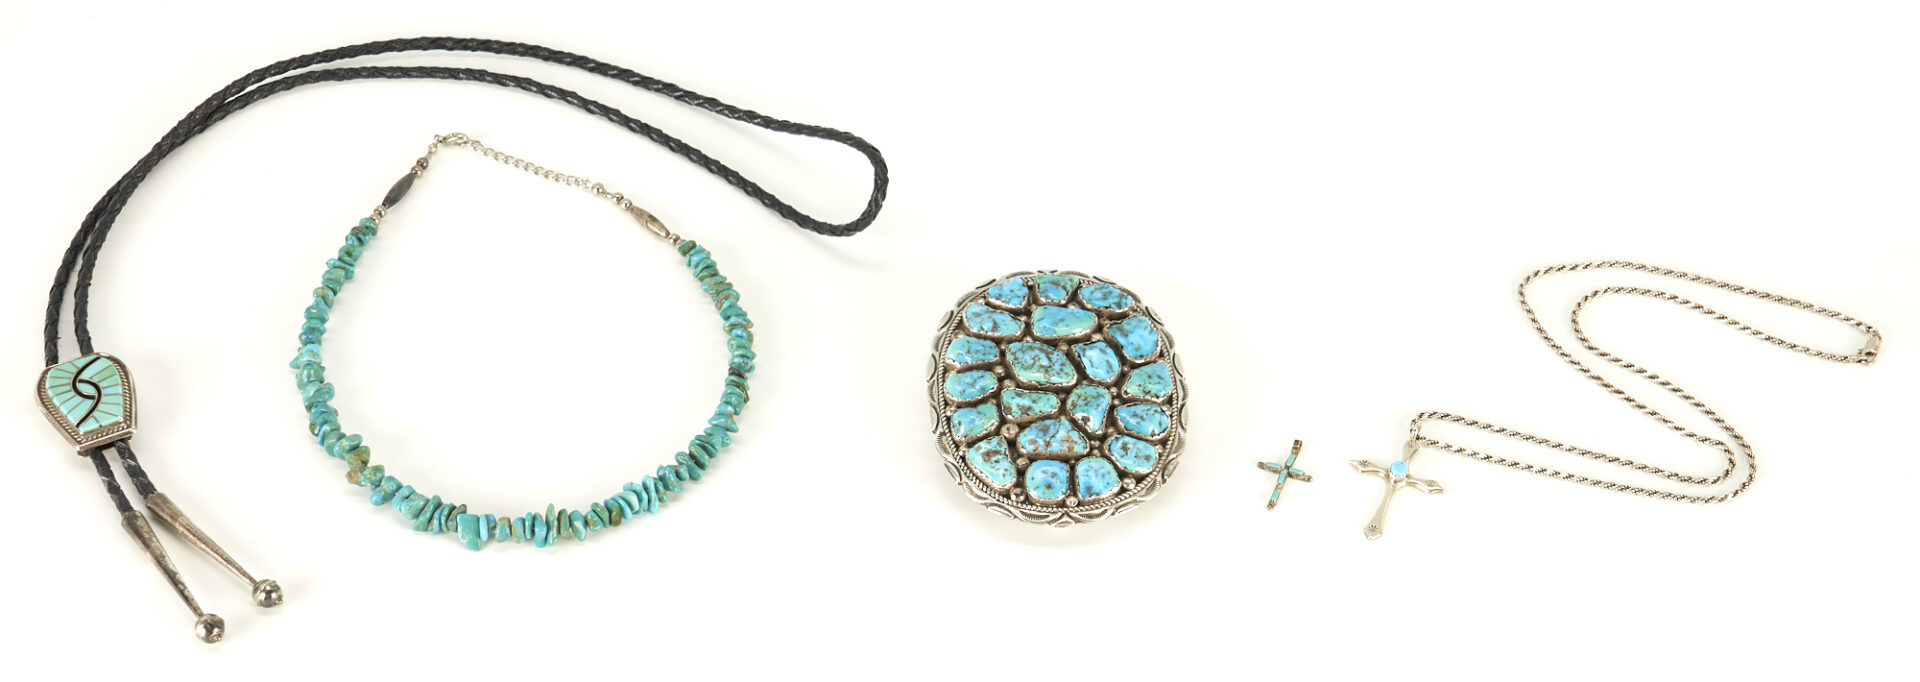 Lot 506: 5 Native American Silver & Turquoise Jewelry Items